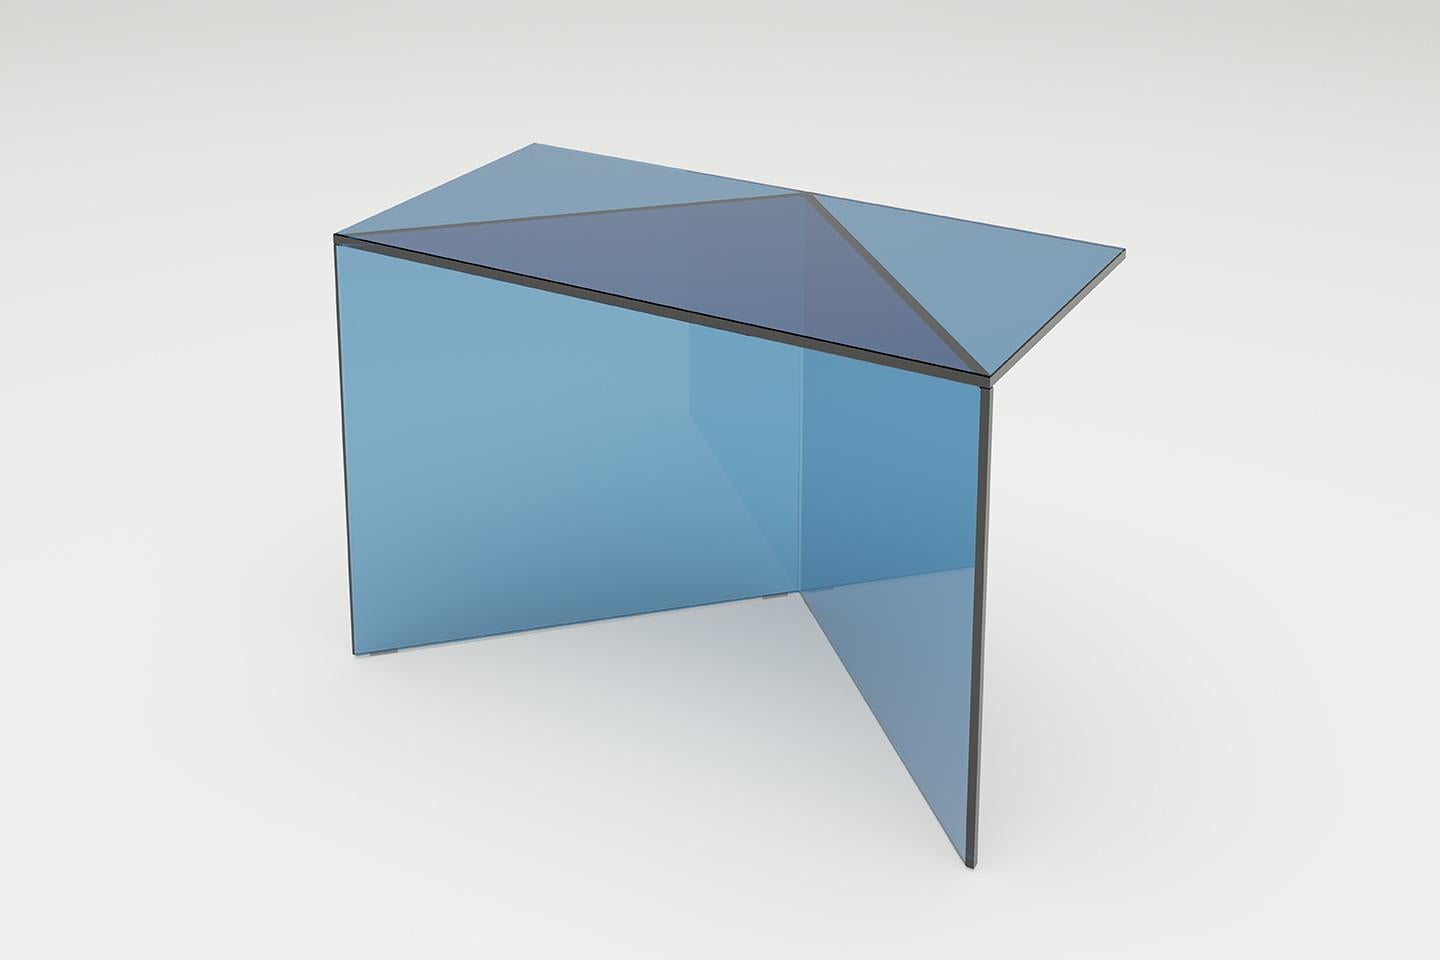 Blue glass poly square coffe table by Sebastian Scherer
Dimensions: D60 x W30 x H40 cm
Materials: Solid coloured glass.
Weight: 12.7 kg.
Also Available: Colours:Clear white (transparent) / clear green / clear blue / clear bronze / clear